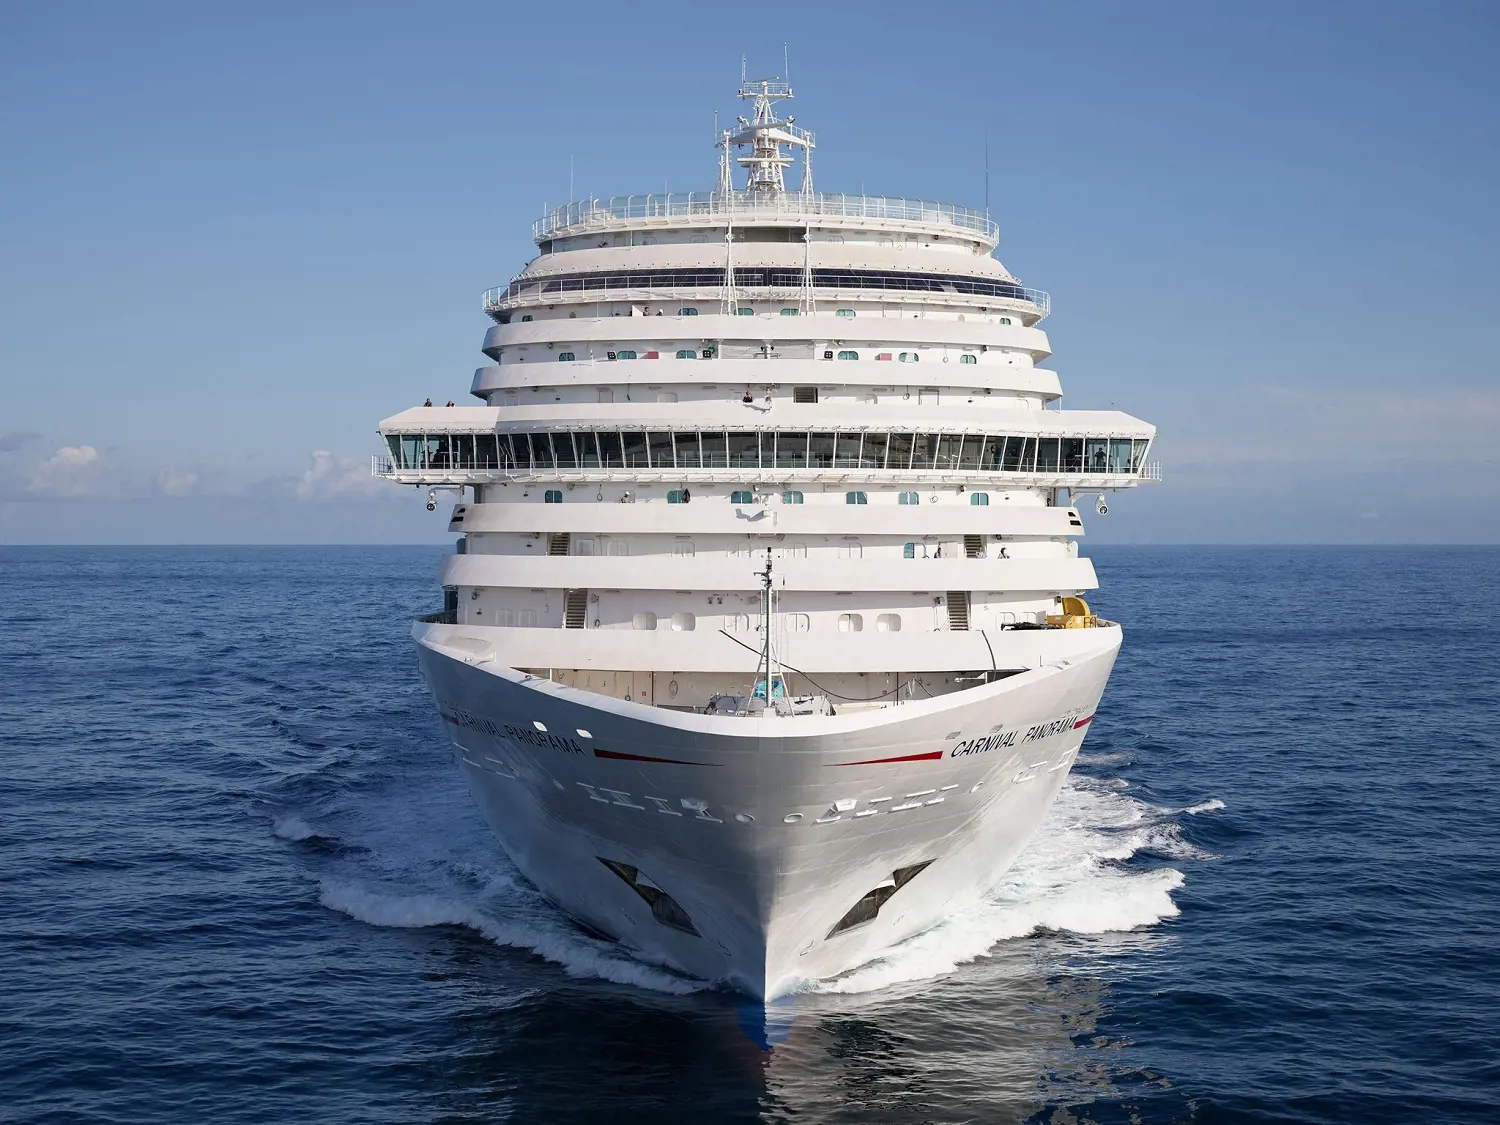 Carnival Panorama is the fifteenth ship built by Fincantieri for Carnival Cruise Line